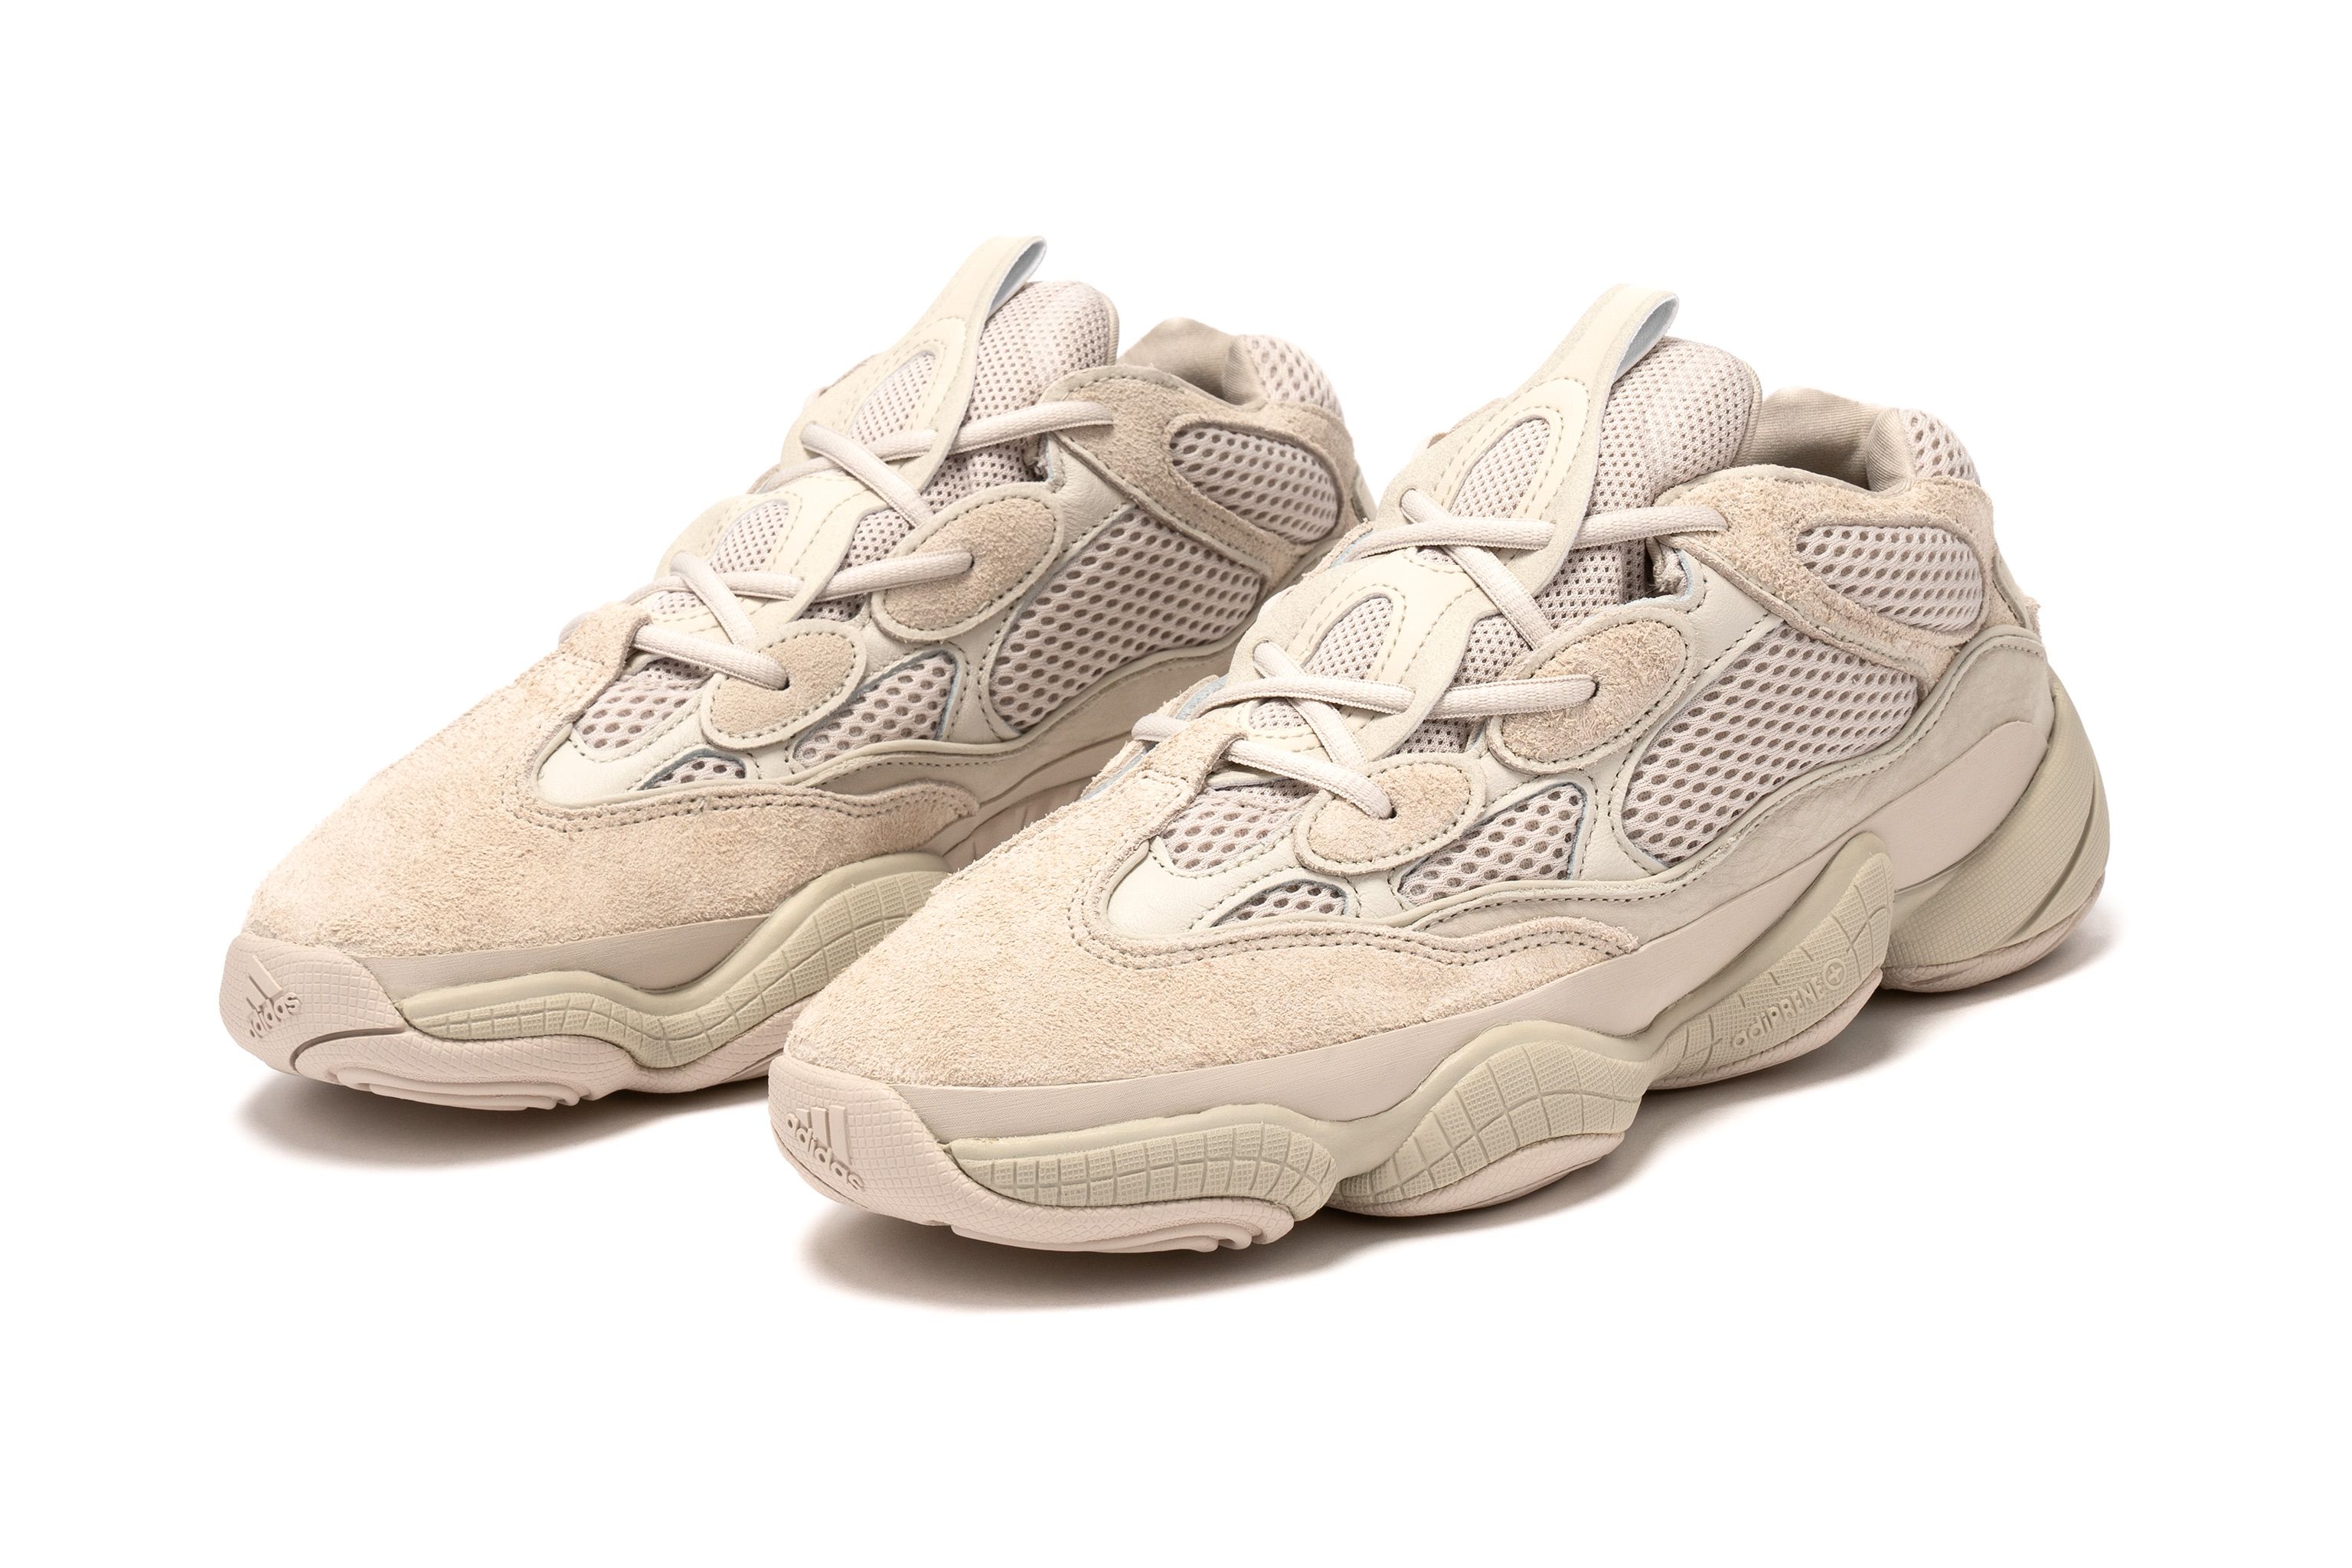 adidas YEEZY 500 'Blush' | Release Date: 02.19.22 | HAVEN